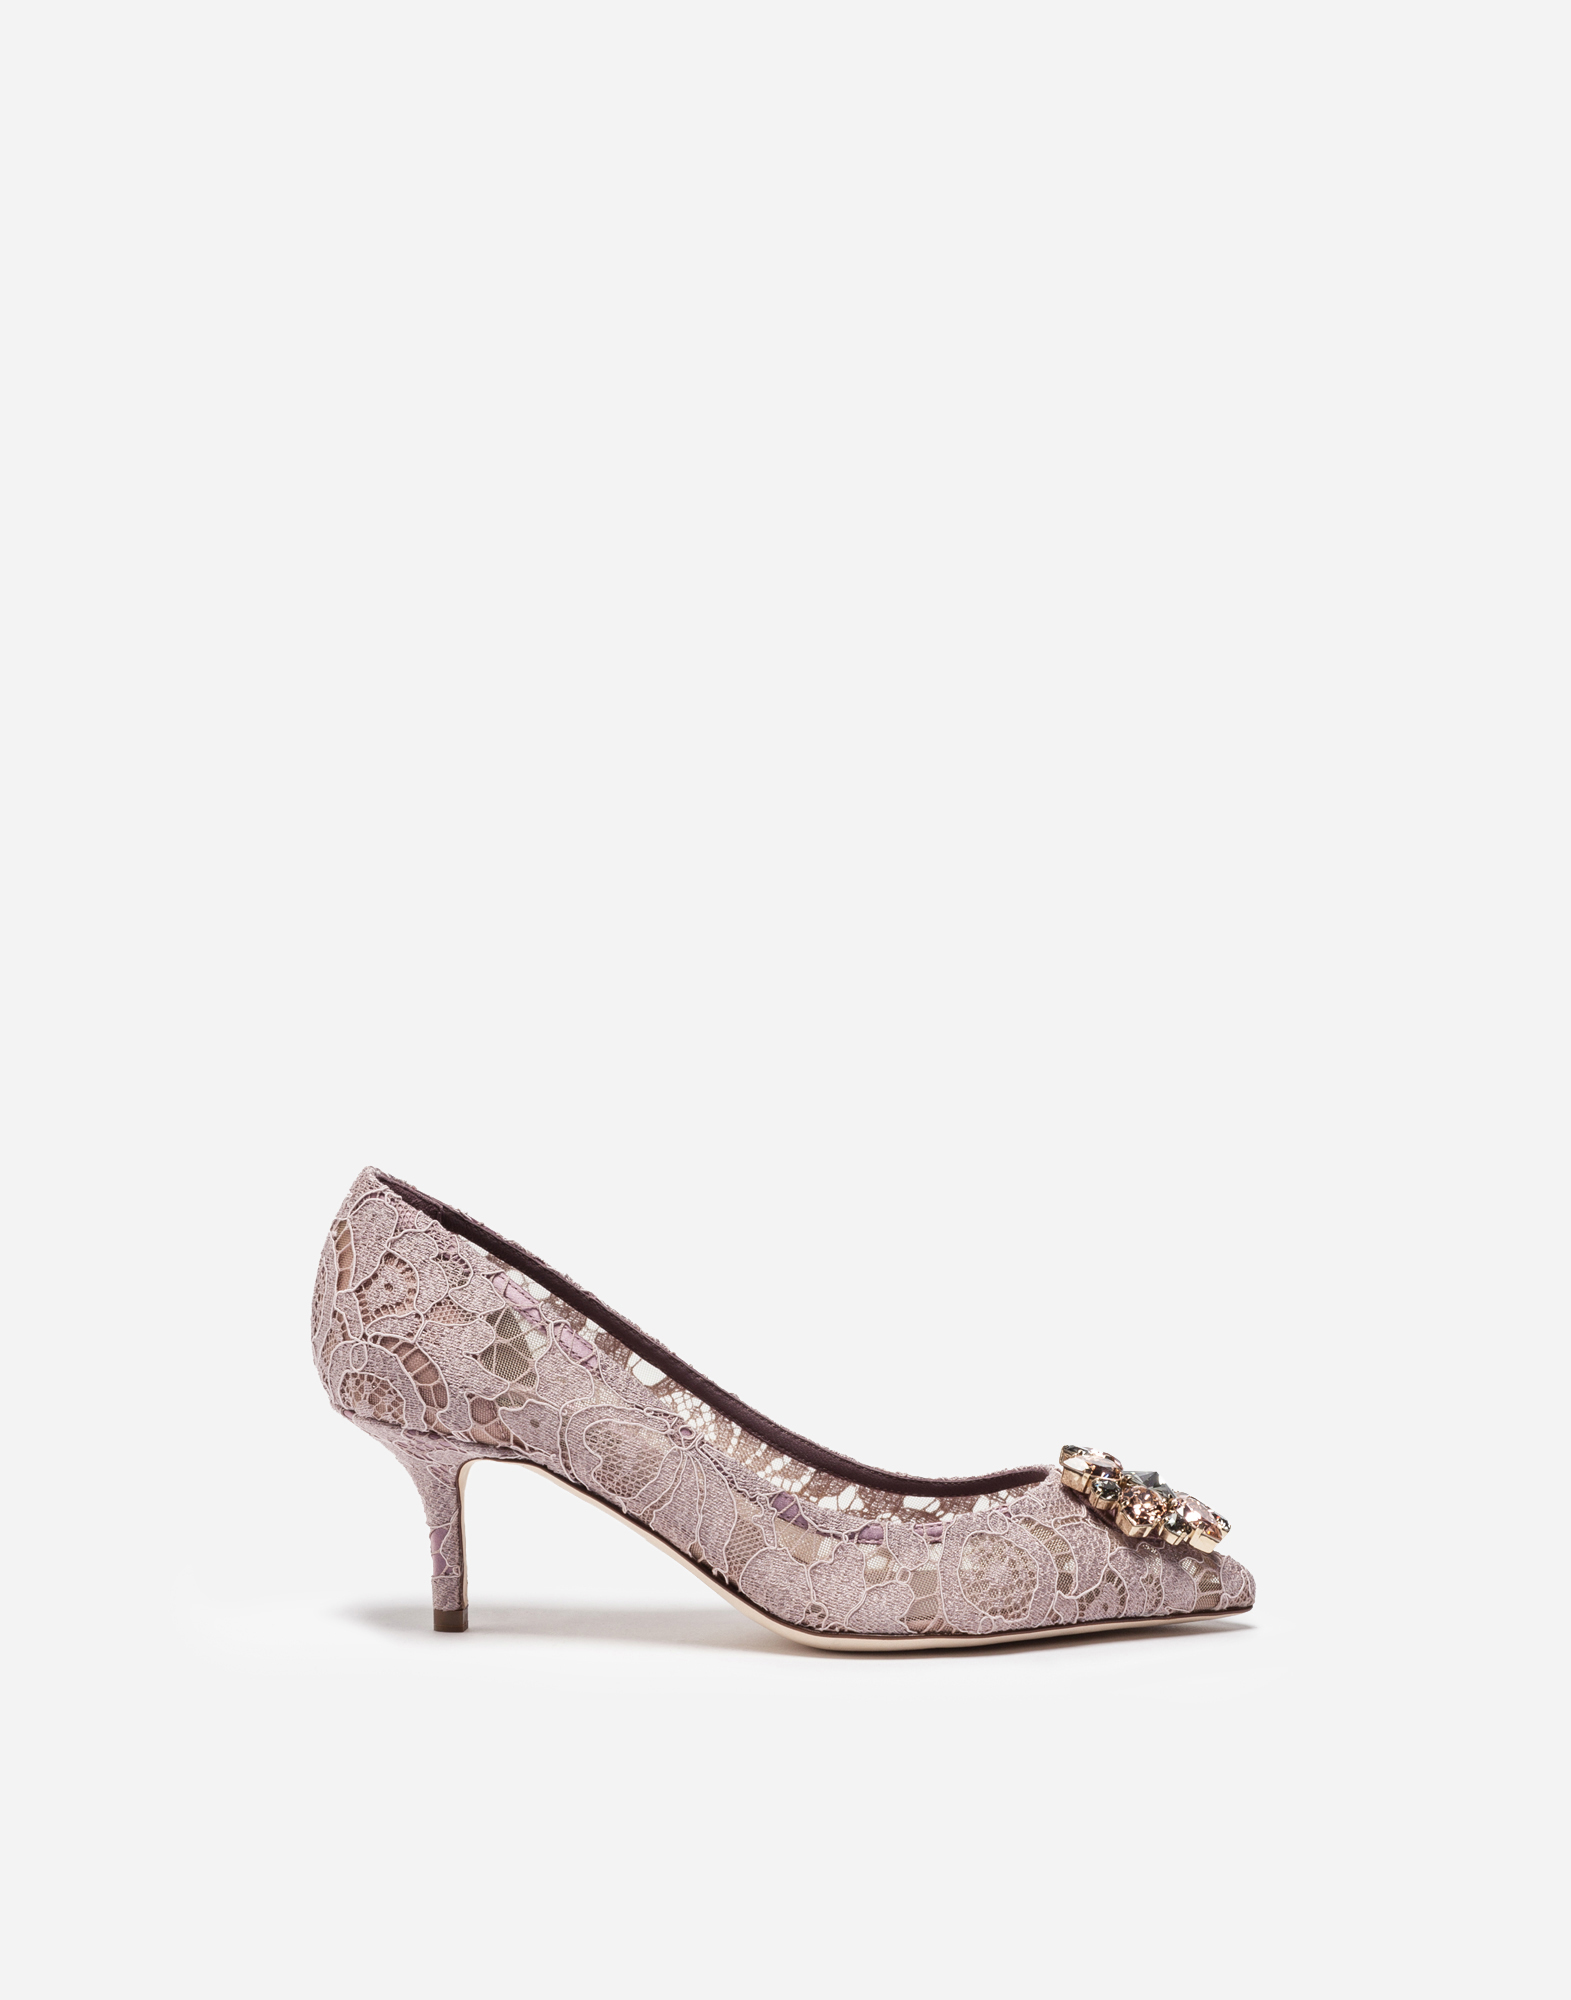 Dolce & Gabbana Pump In Taormina Lace With Crystals In Blush